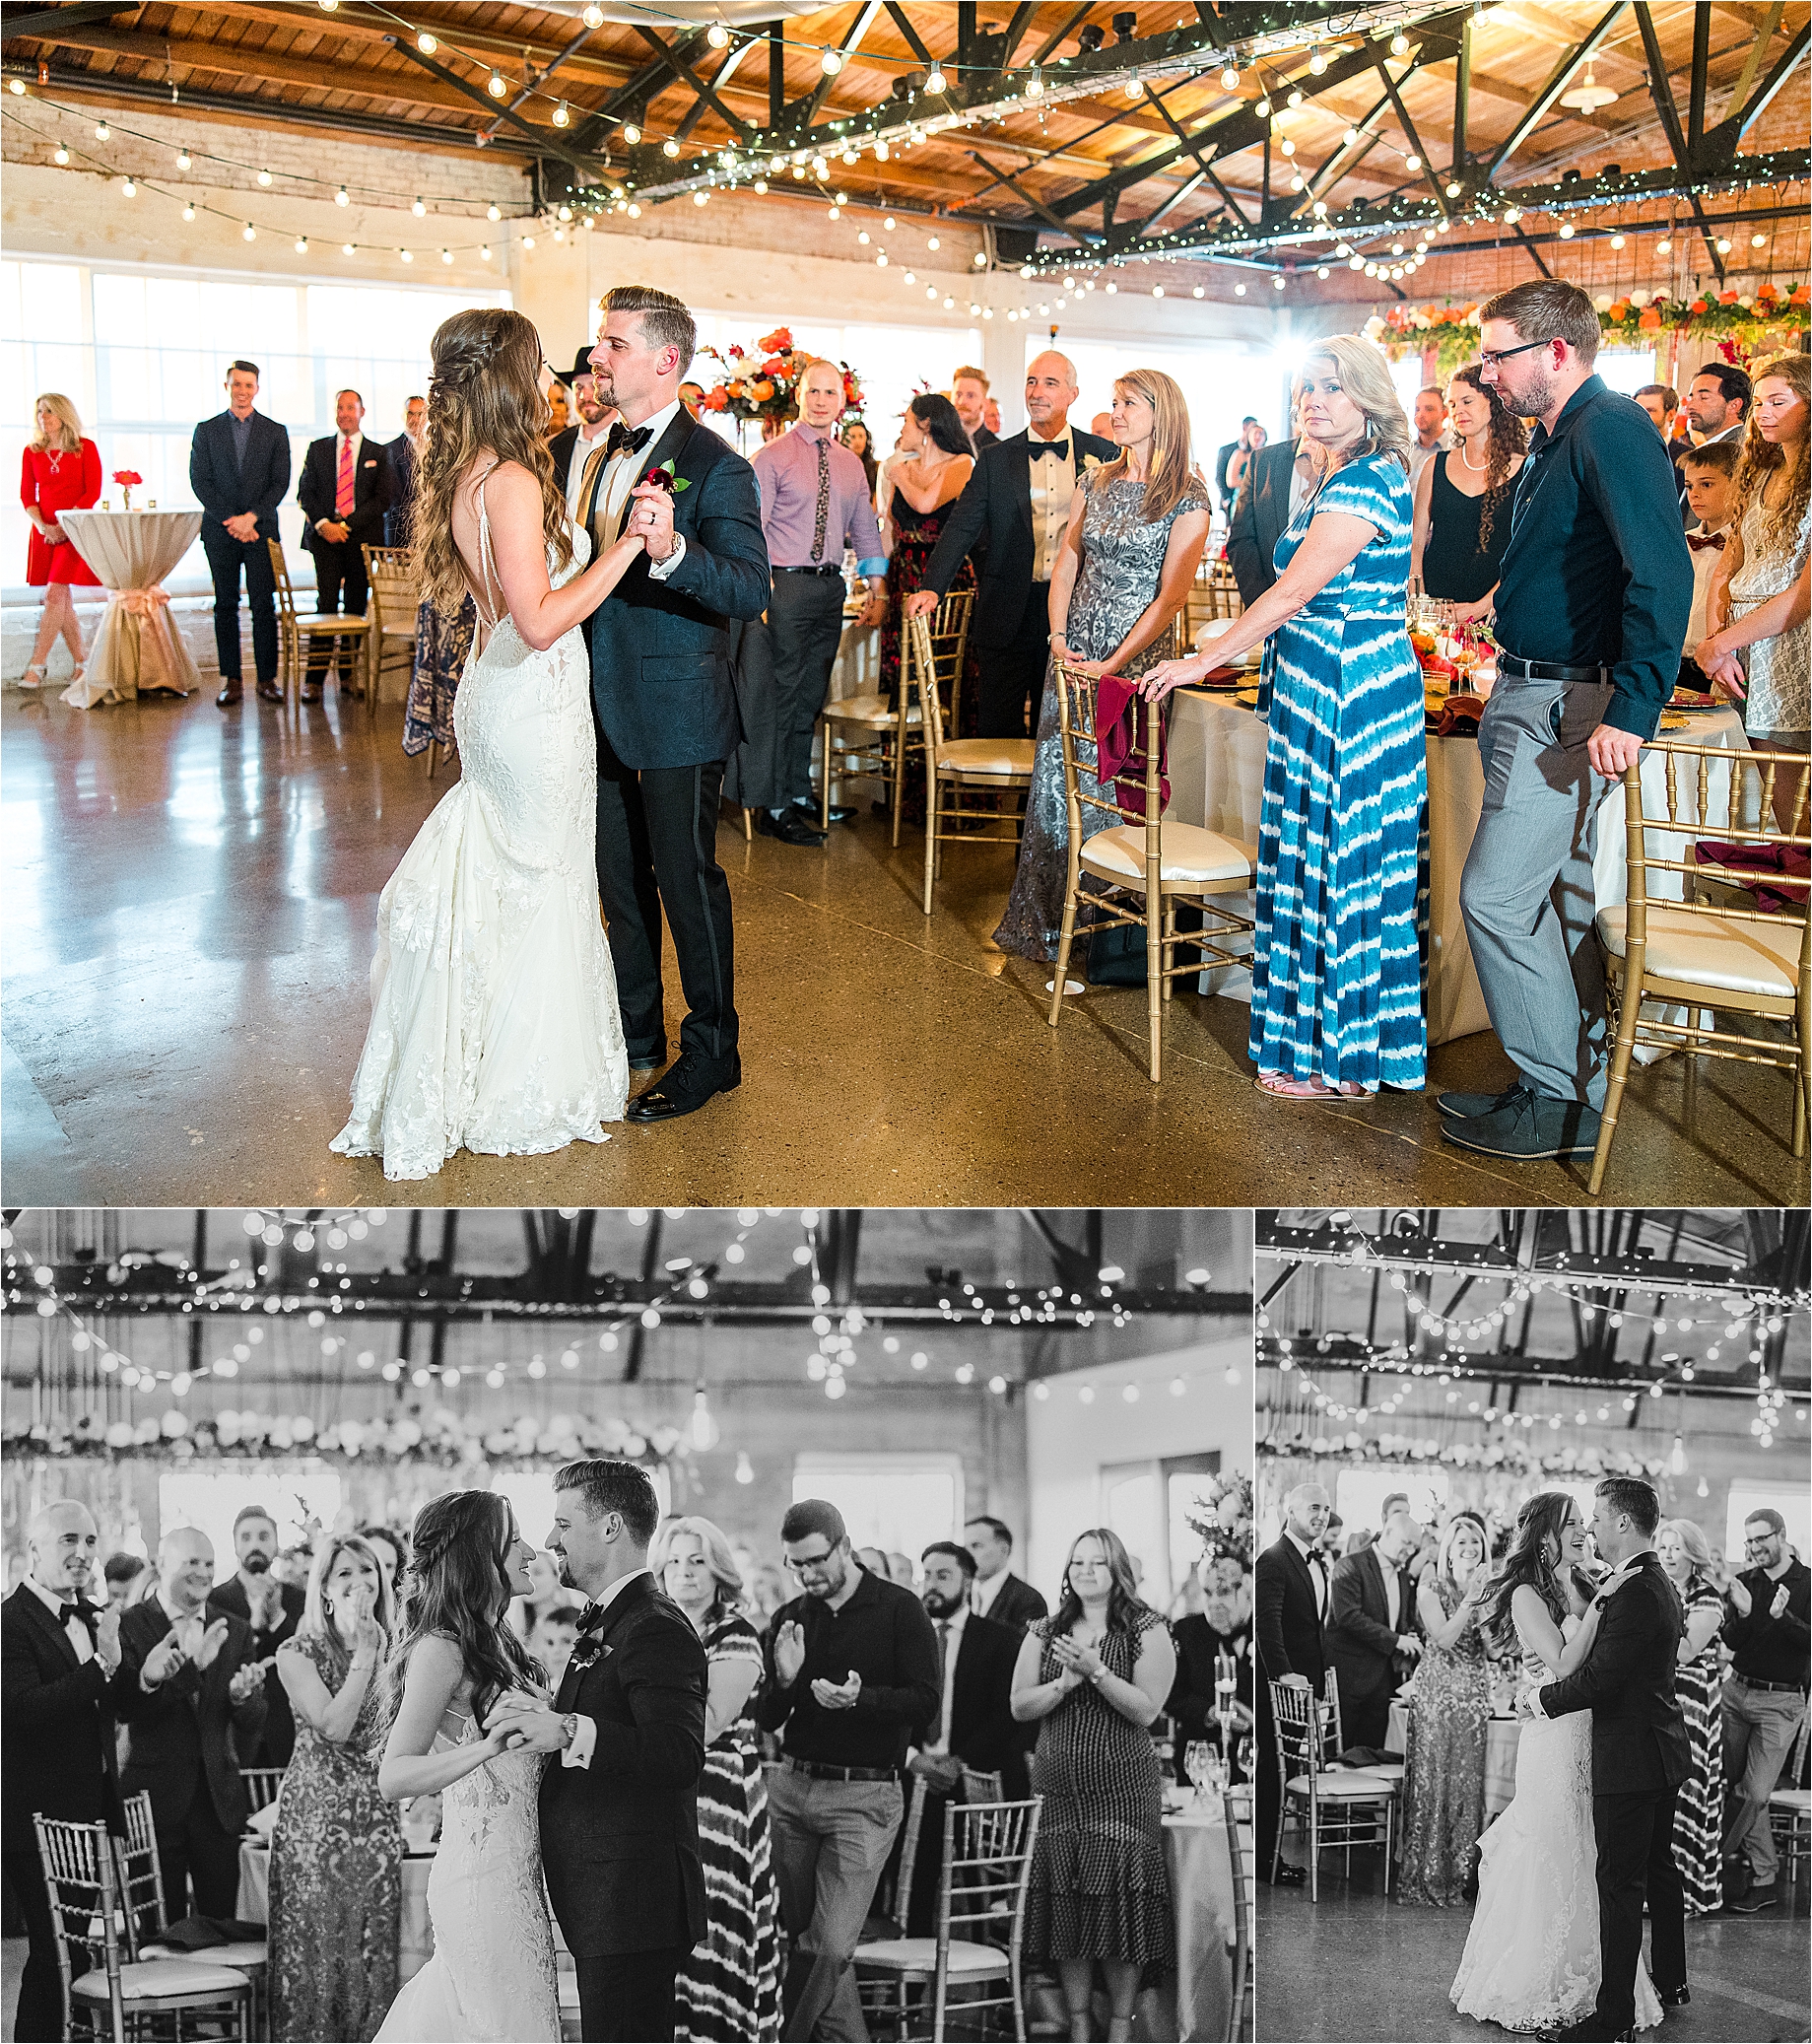 A couple shares their first dance as husband and wife while their guests look on